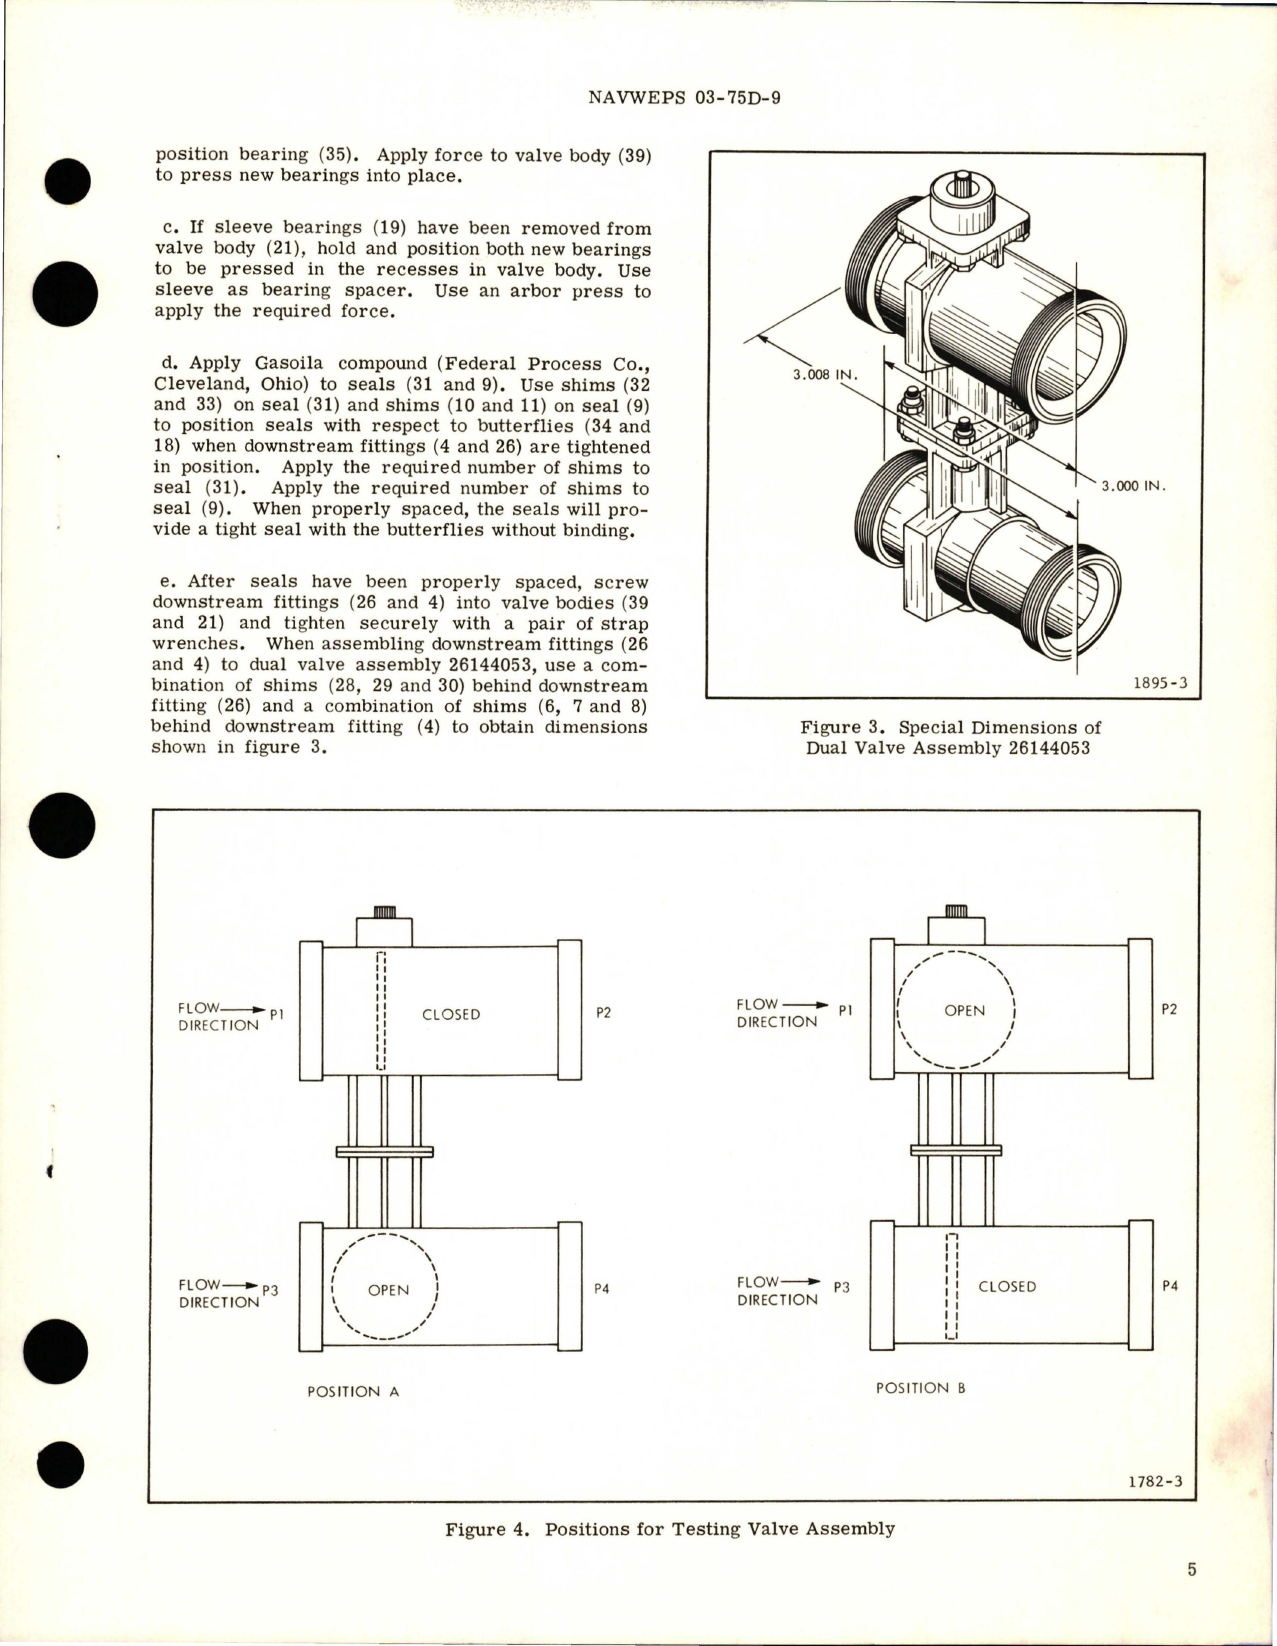 Sample page 5 from AirCorps Library document: Overhaul Instructions with Illustrated Parts Breakdown for Dual Valve Assembly - Parts 25734202, 26044013, and 26144053